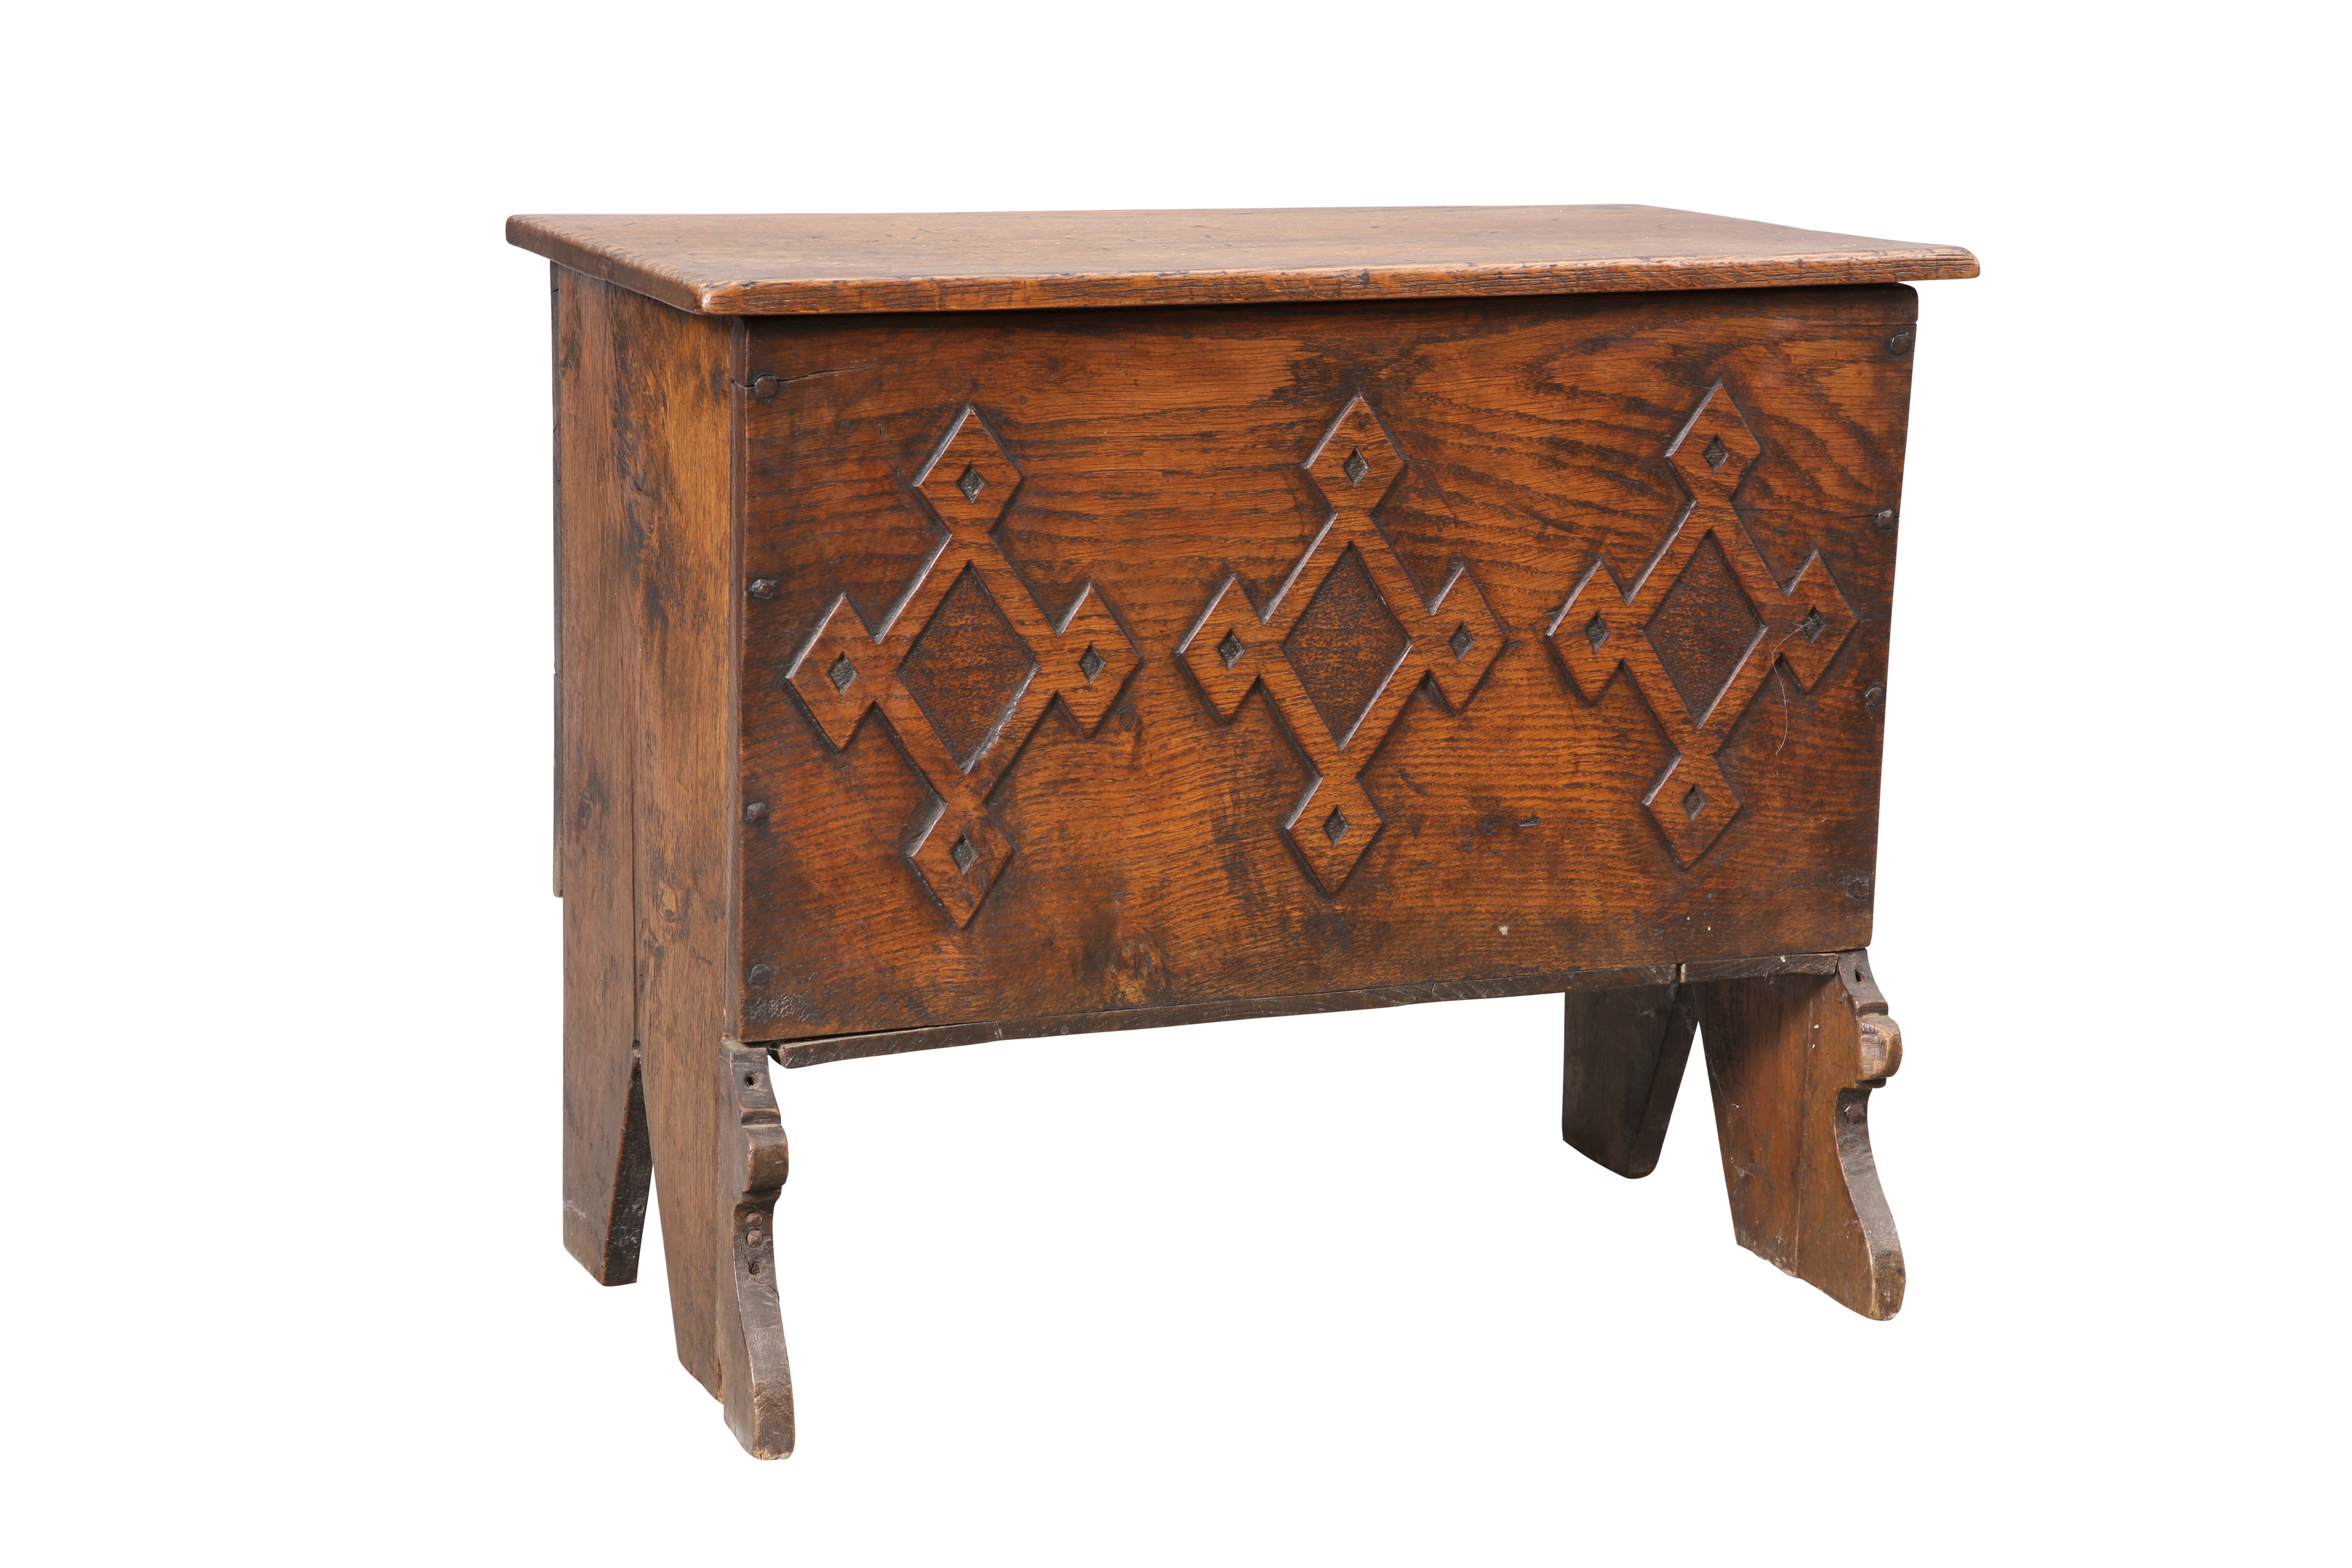 A SMALL BOARDED OAK CHEST - Image 2 of 2